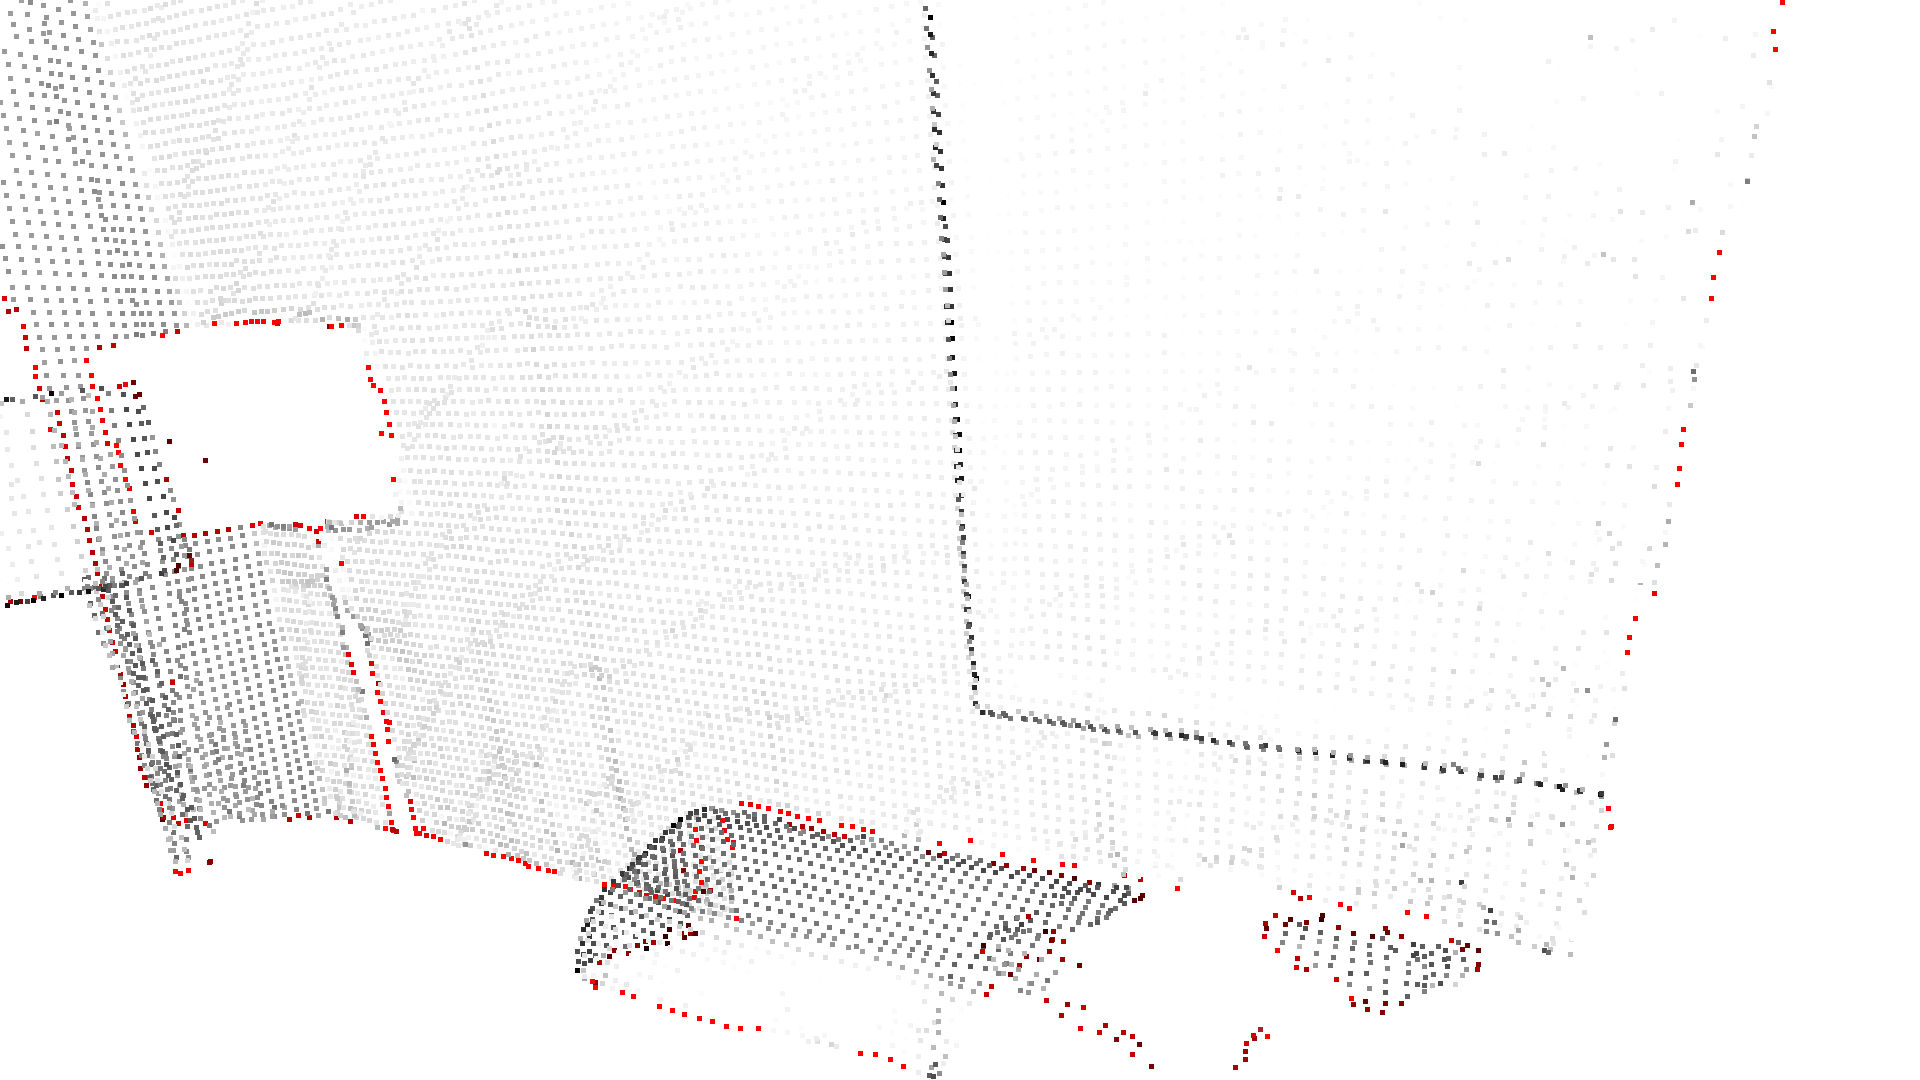 ../../_images/tutorial_geometry_pointcloud_outlier_removal_11_1.png